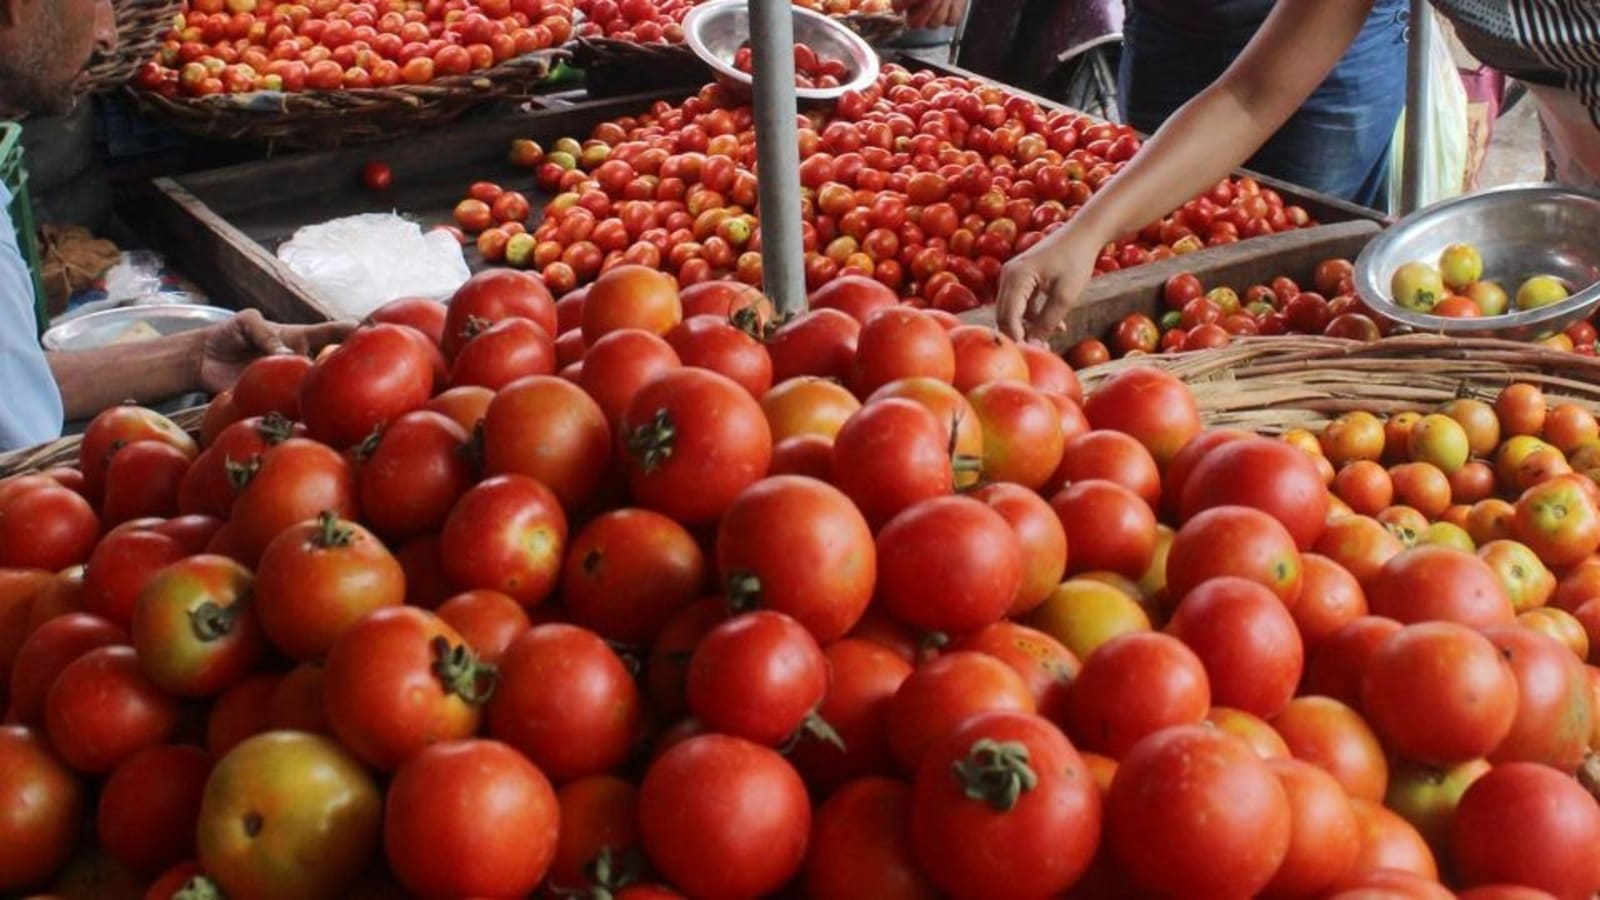 Tomato prices soar high in major cities due to tight supply | Latest News India - Hindustan Times